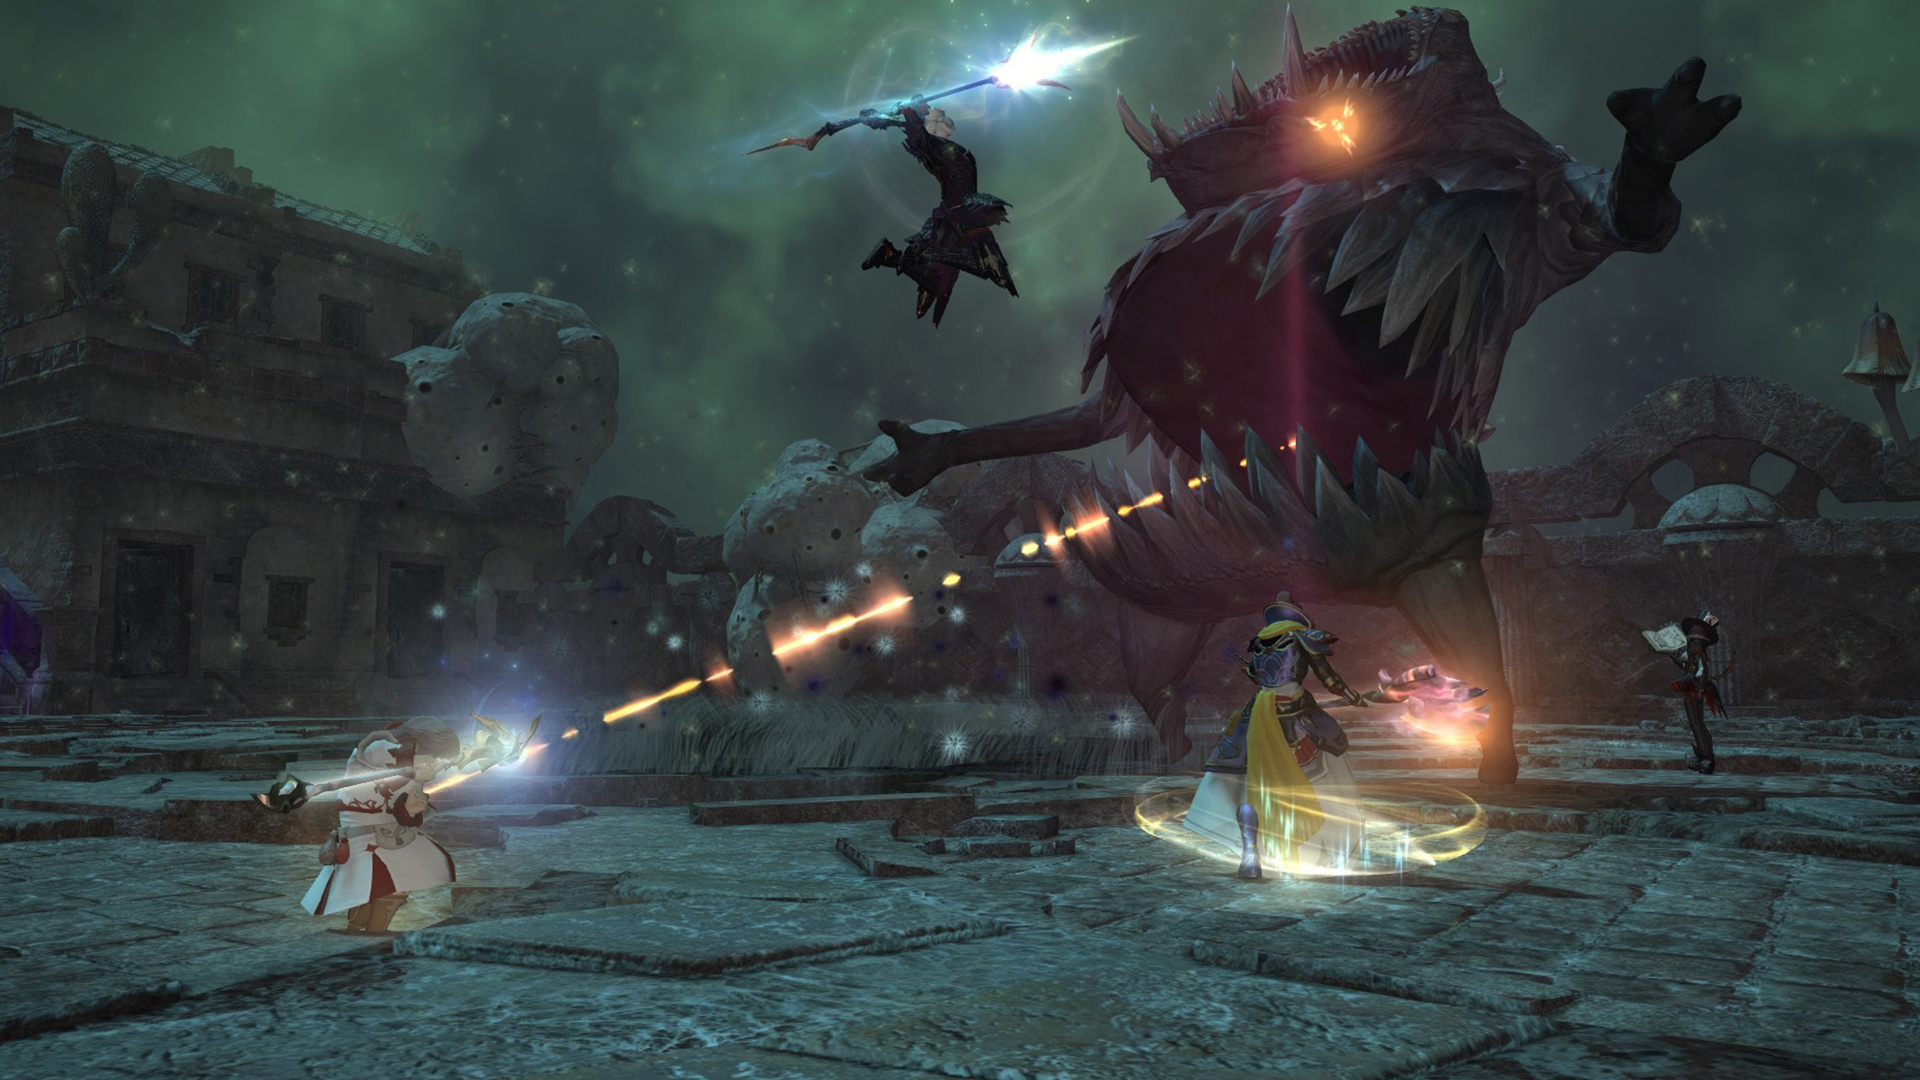 Final Fantasy XIV is surprisingly accessible for newcomers